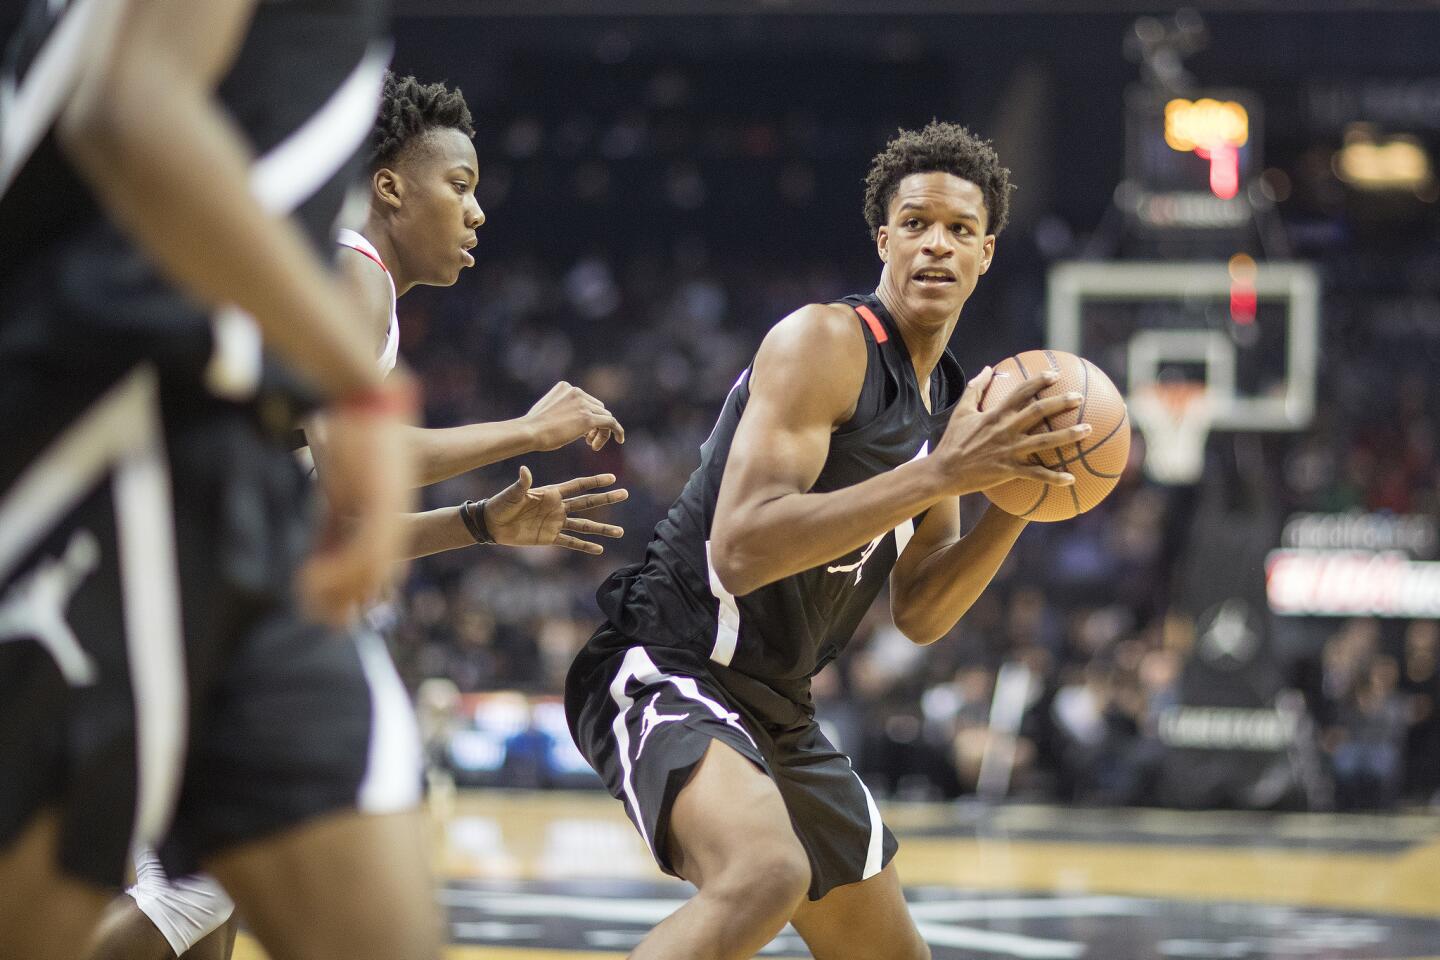 Crossroads' Shareef O'Neal, the son of basketball great Shaquille O'Neal, takes part in the Jordan Brand Classic in April 2018.